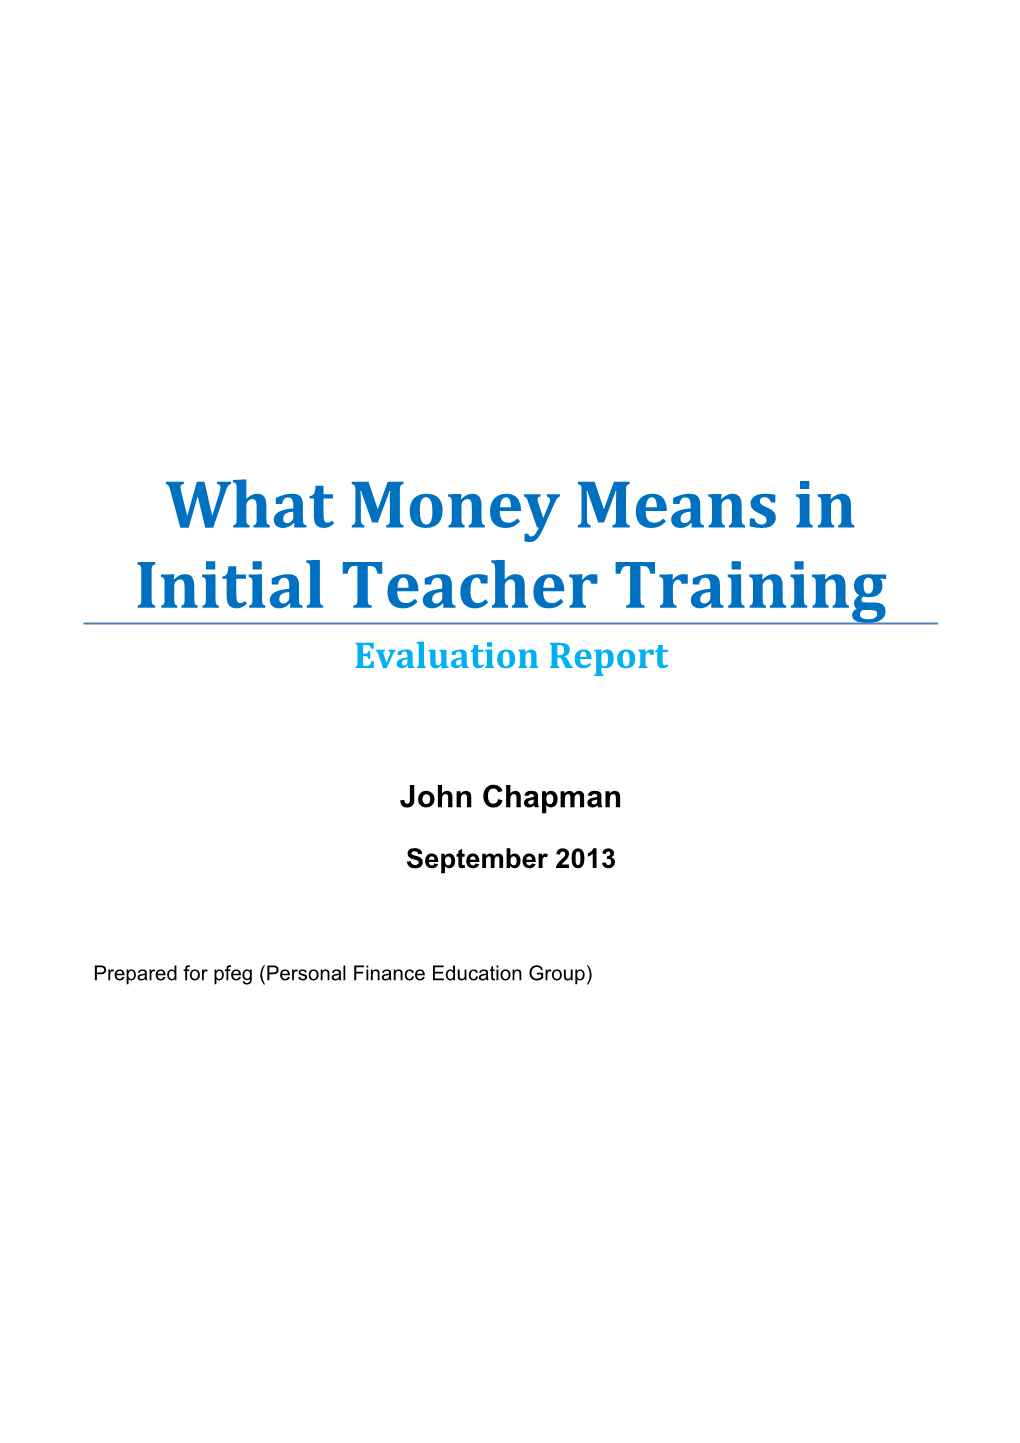 What Money Means in Initial Teacher Training